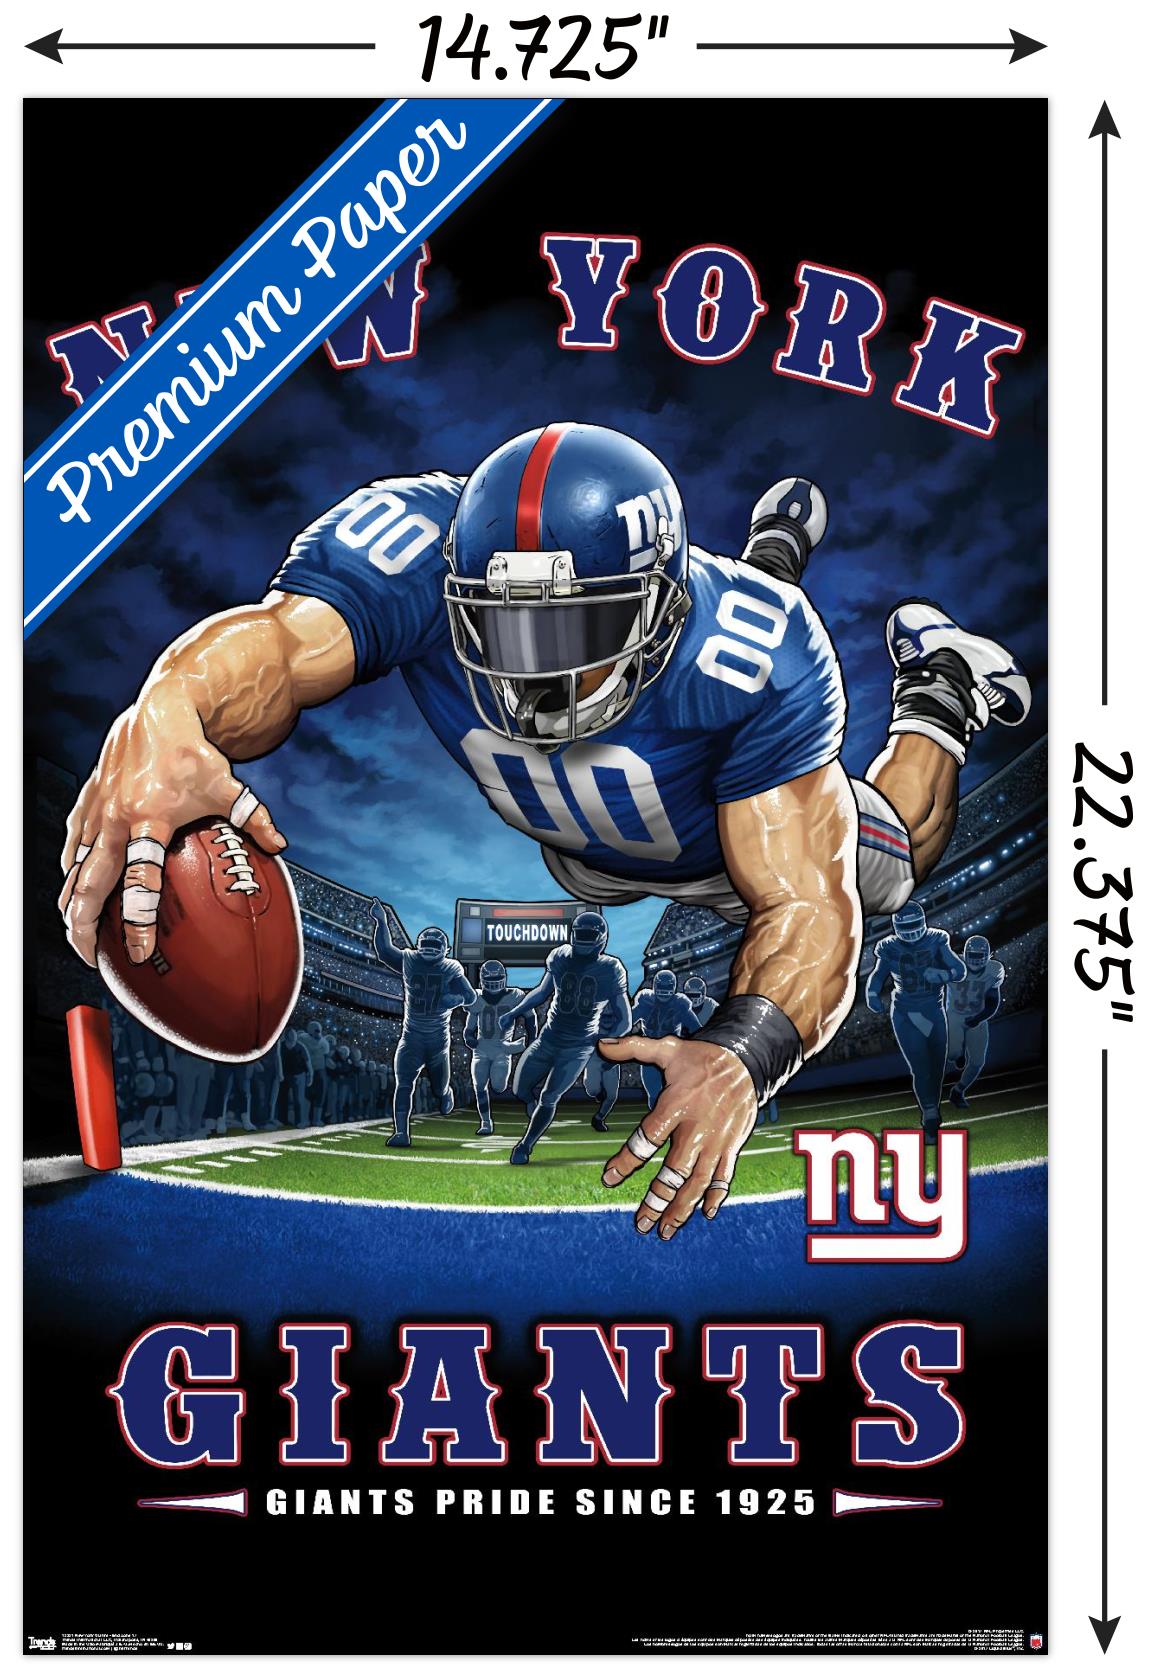 NFL New York Giants - End Zone 17 Wall Poster, 14.725" x 22.375" - image 3 of 5